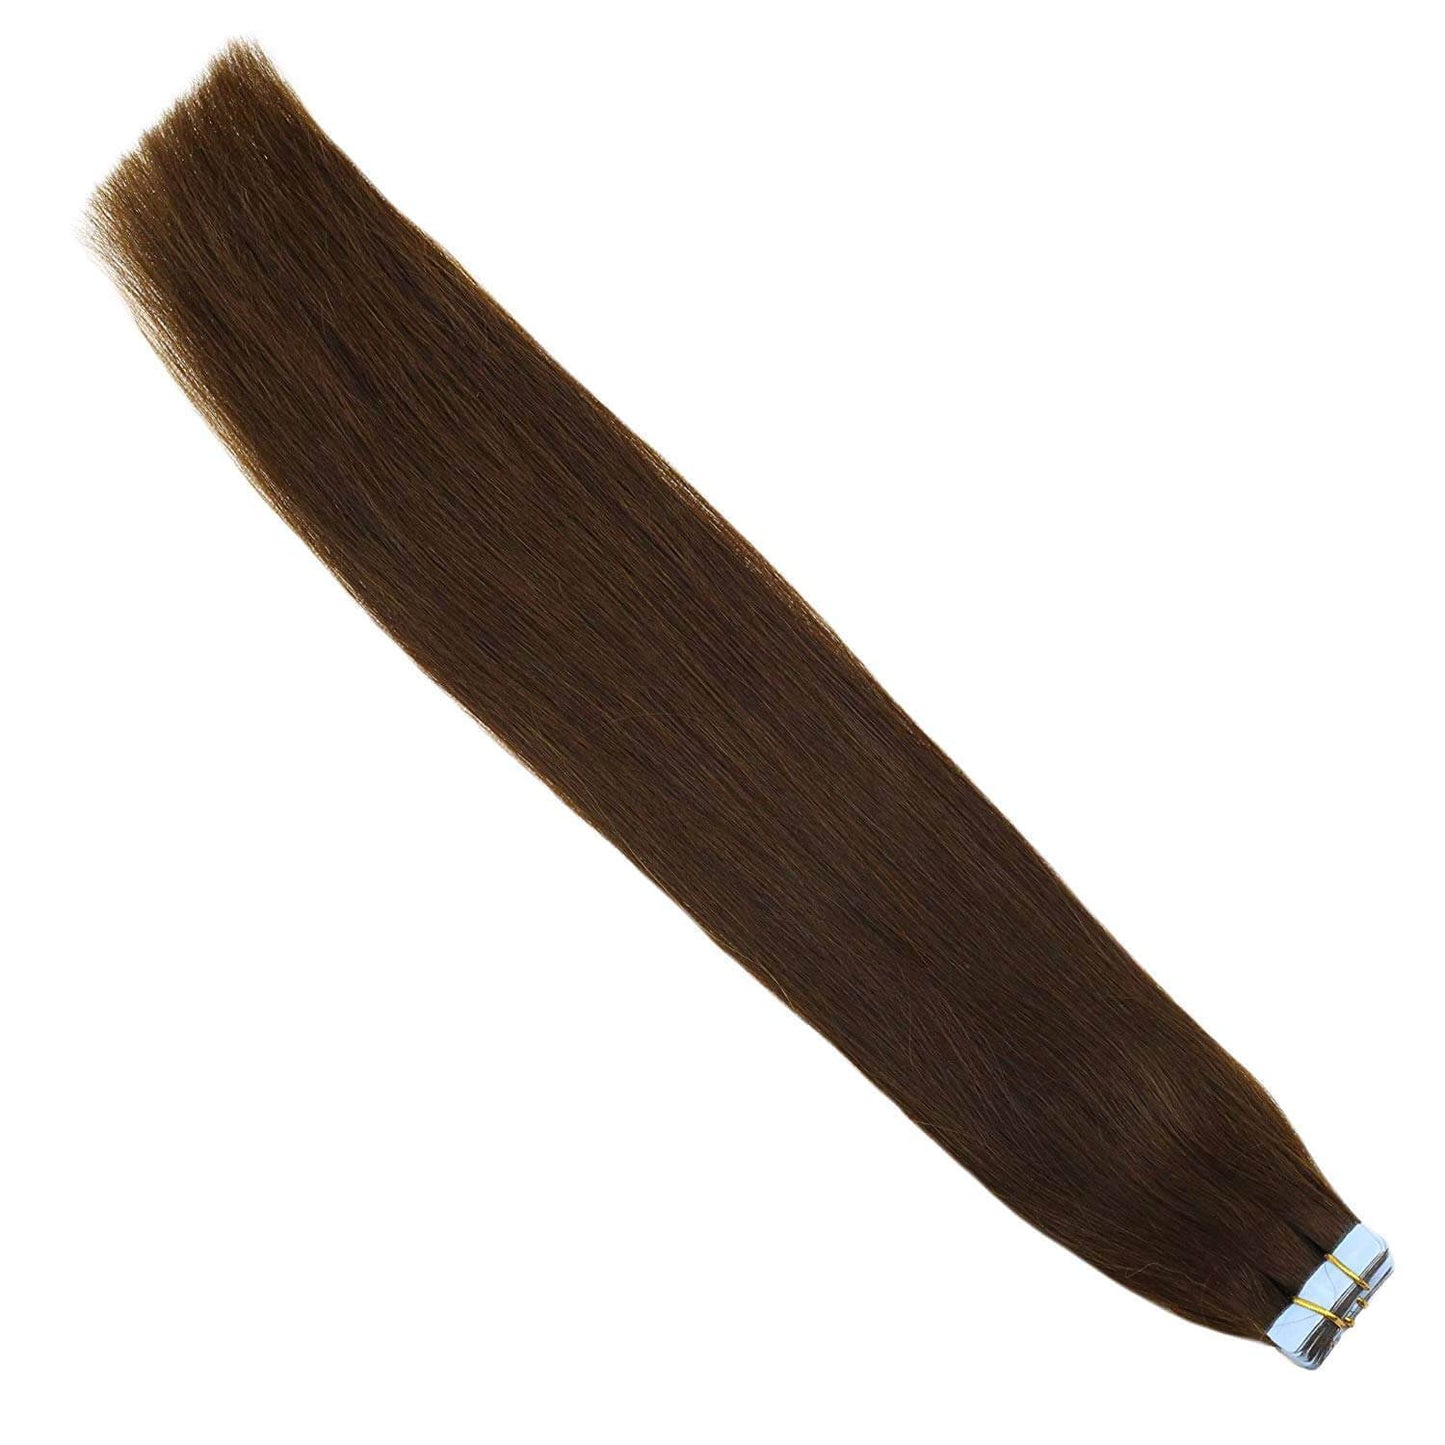 100% Human Hair Extensions Tape in #4 Brown